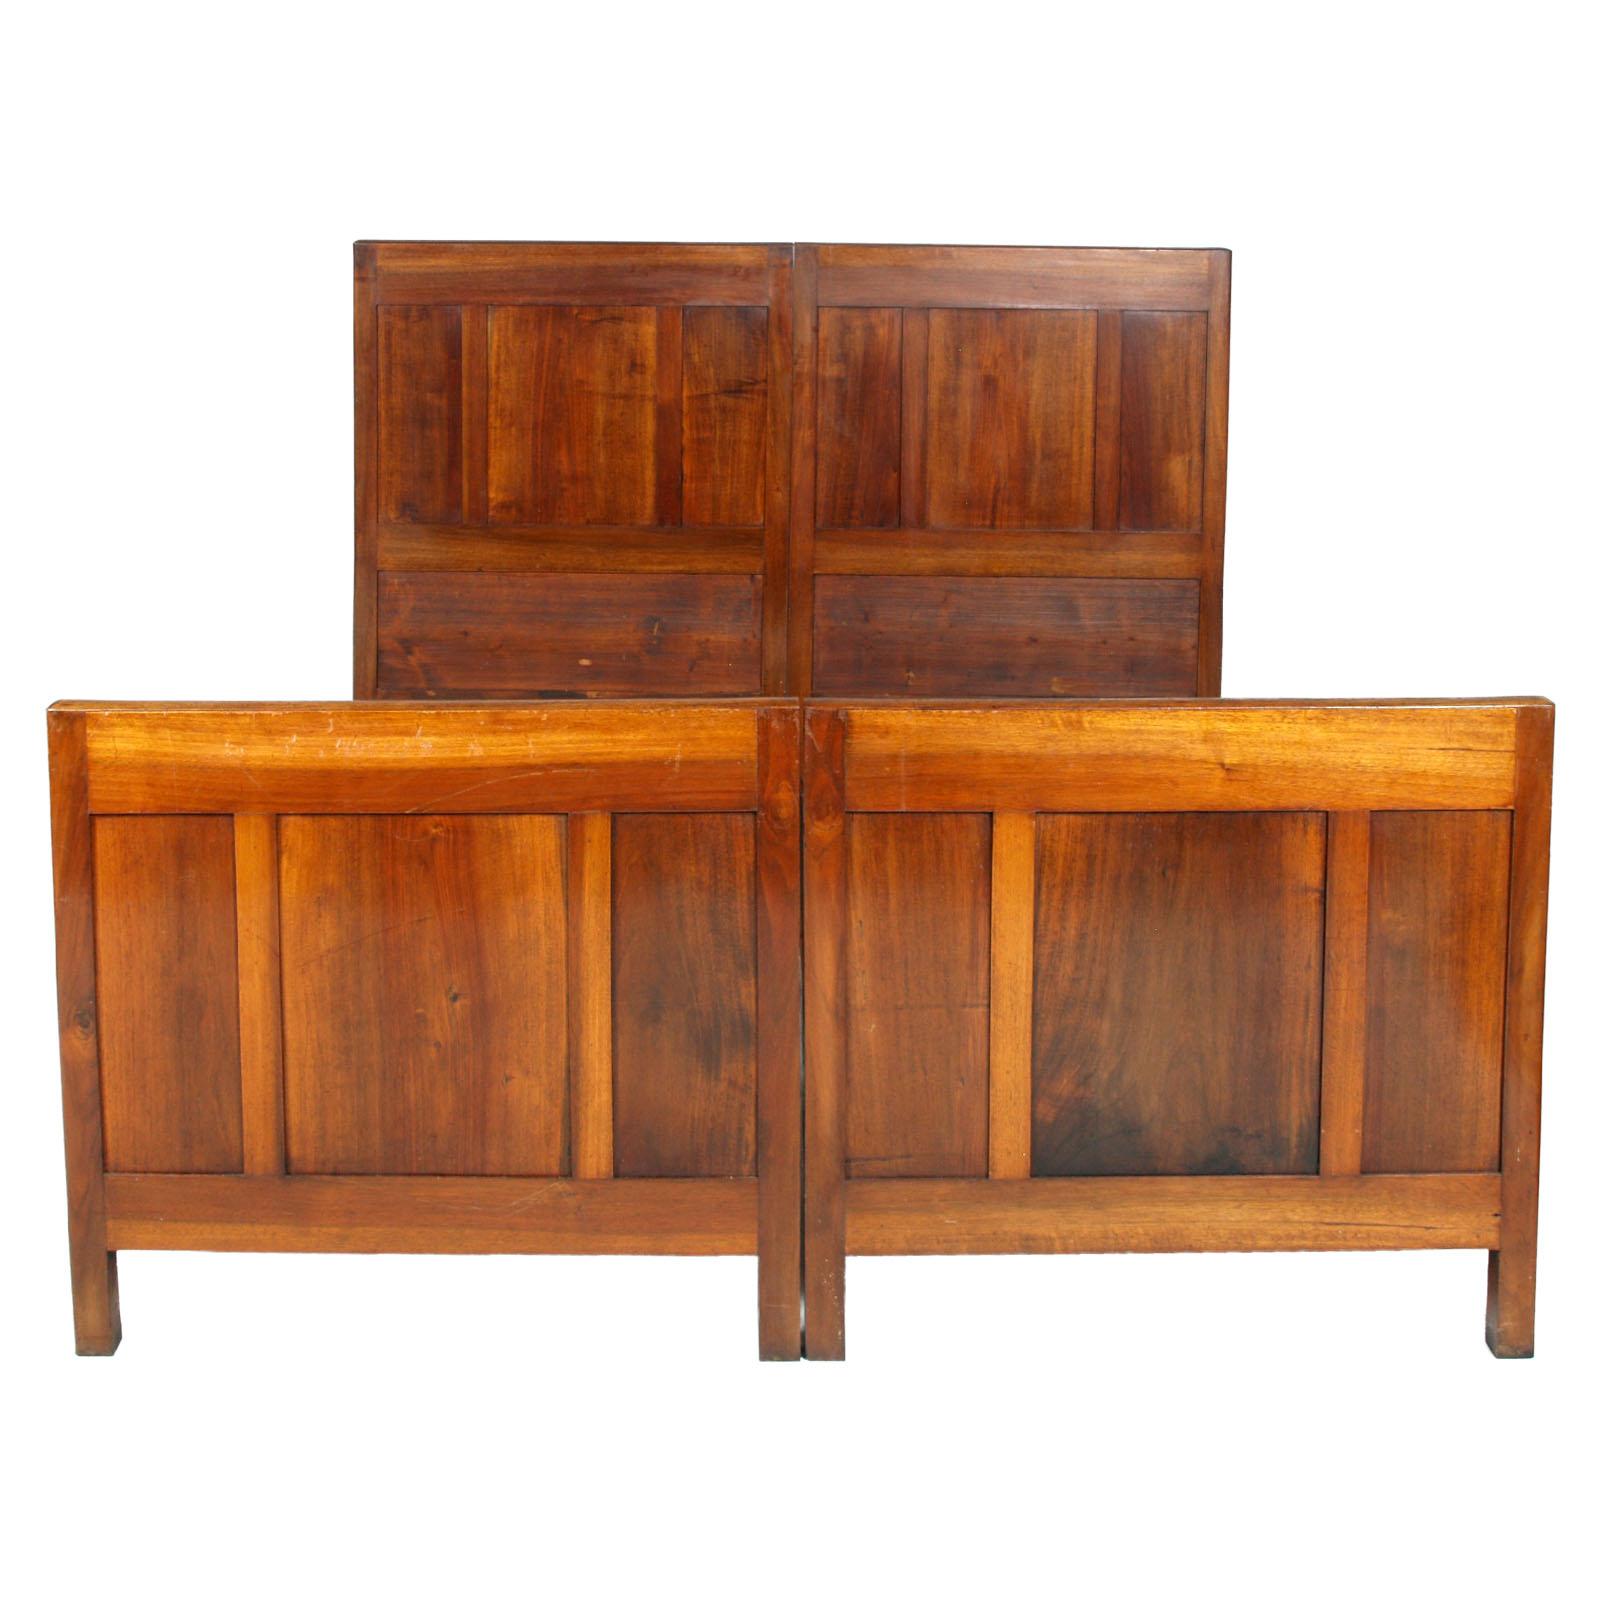 Robust 1930 country twin beds in solid cherrywood, art deco period, wax polished

Measure cm: H134/83 W176 D206 (internal 193 x 80).